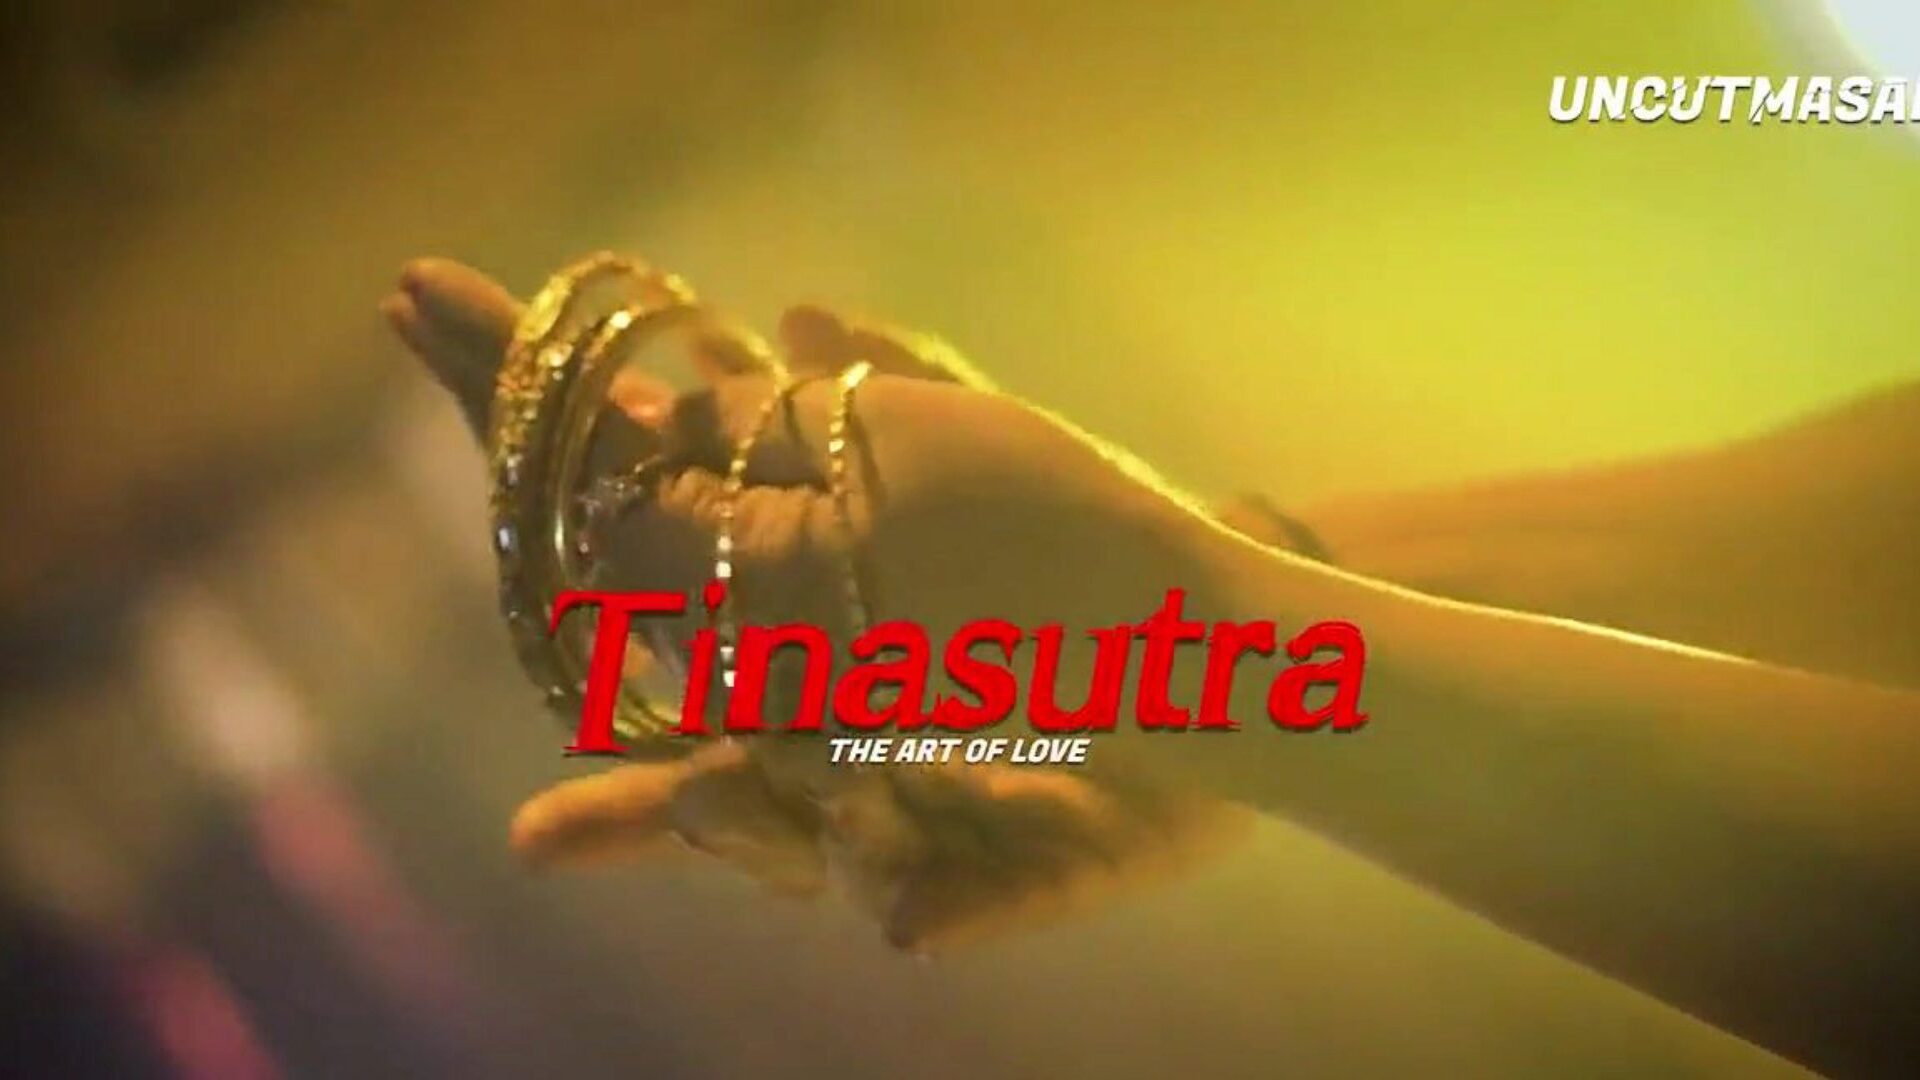 tinasutra a bengali sex story, free indian hd porn b9 watch tinasutra on a bengali sex story clip on xhamster, the most good hd fuck-a-thon tube website with ton of free-for-all asian indian & free bengali pornography videos